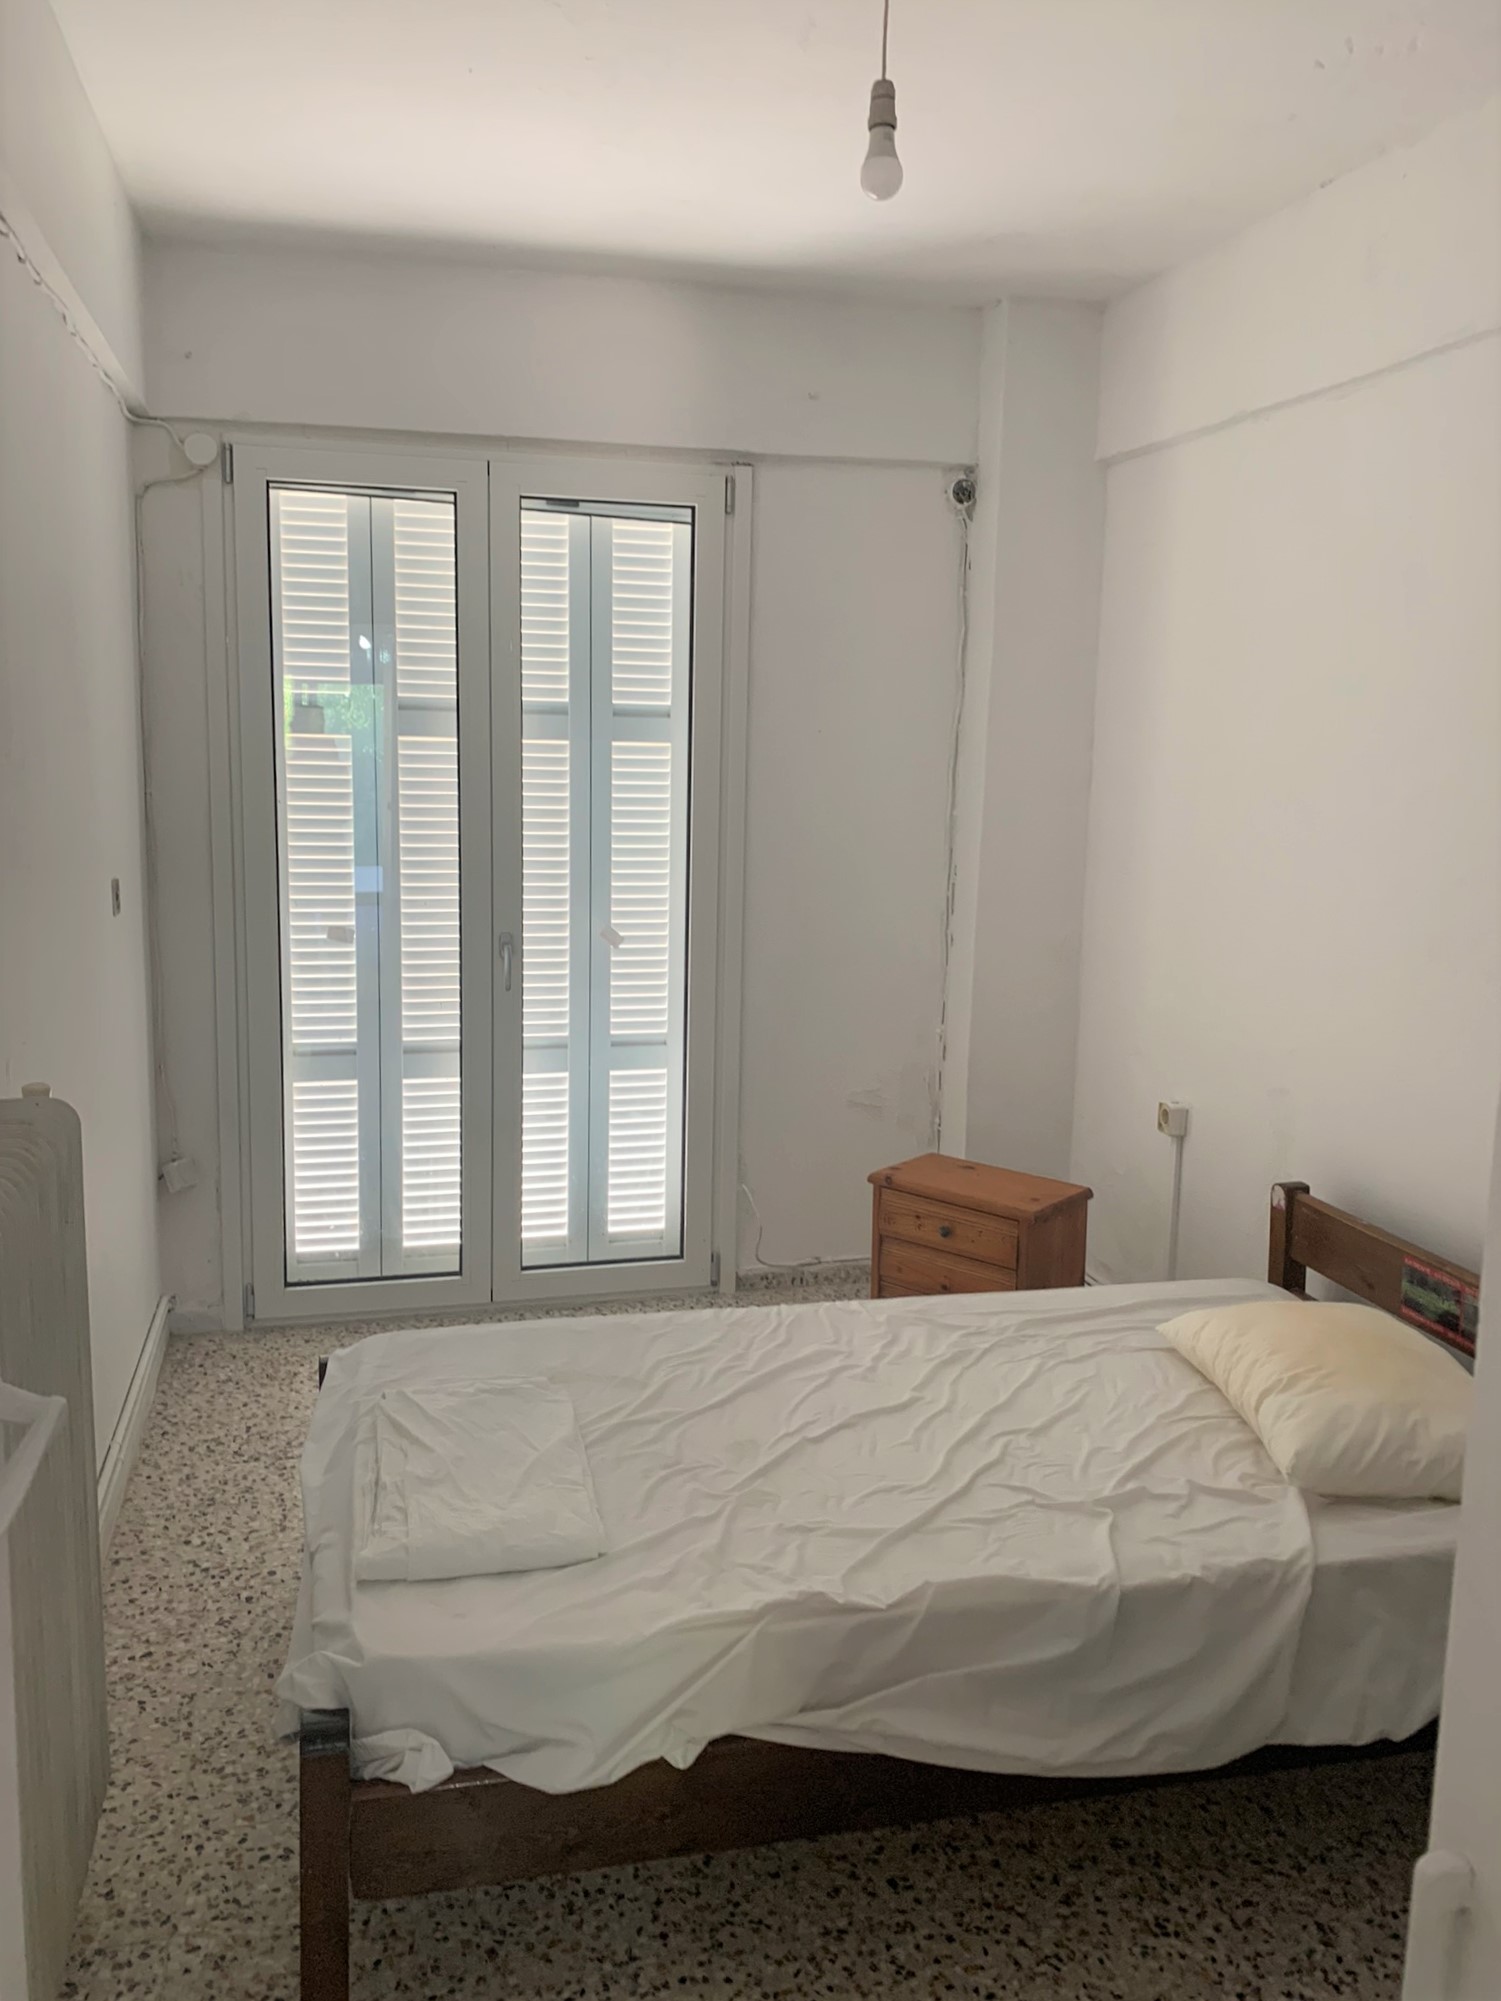 Bedroom of house for sale in Ithaca Greece, Frikes